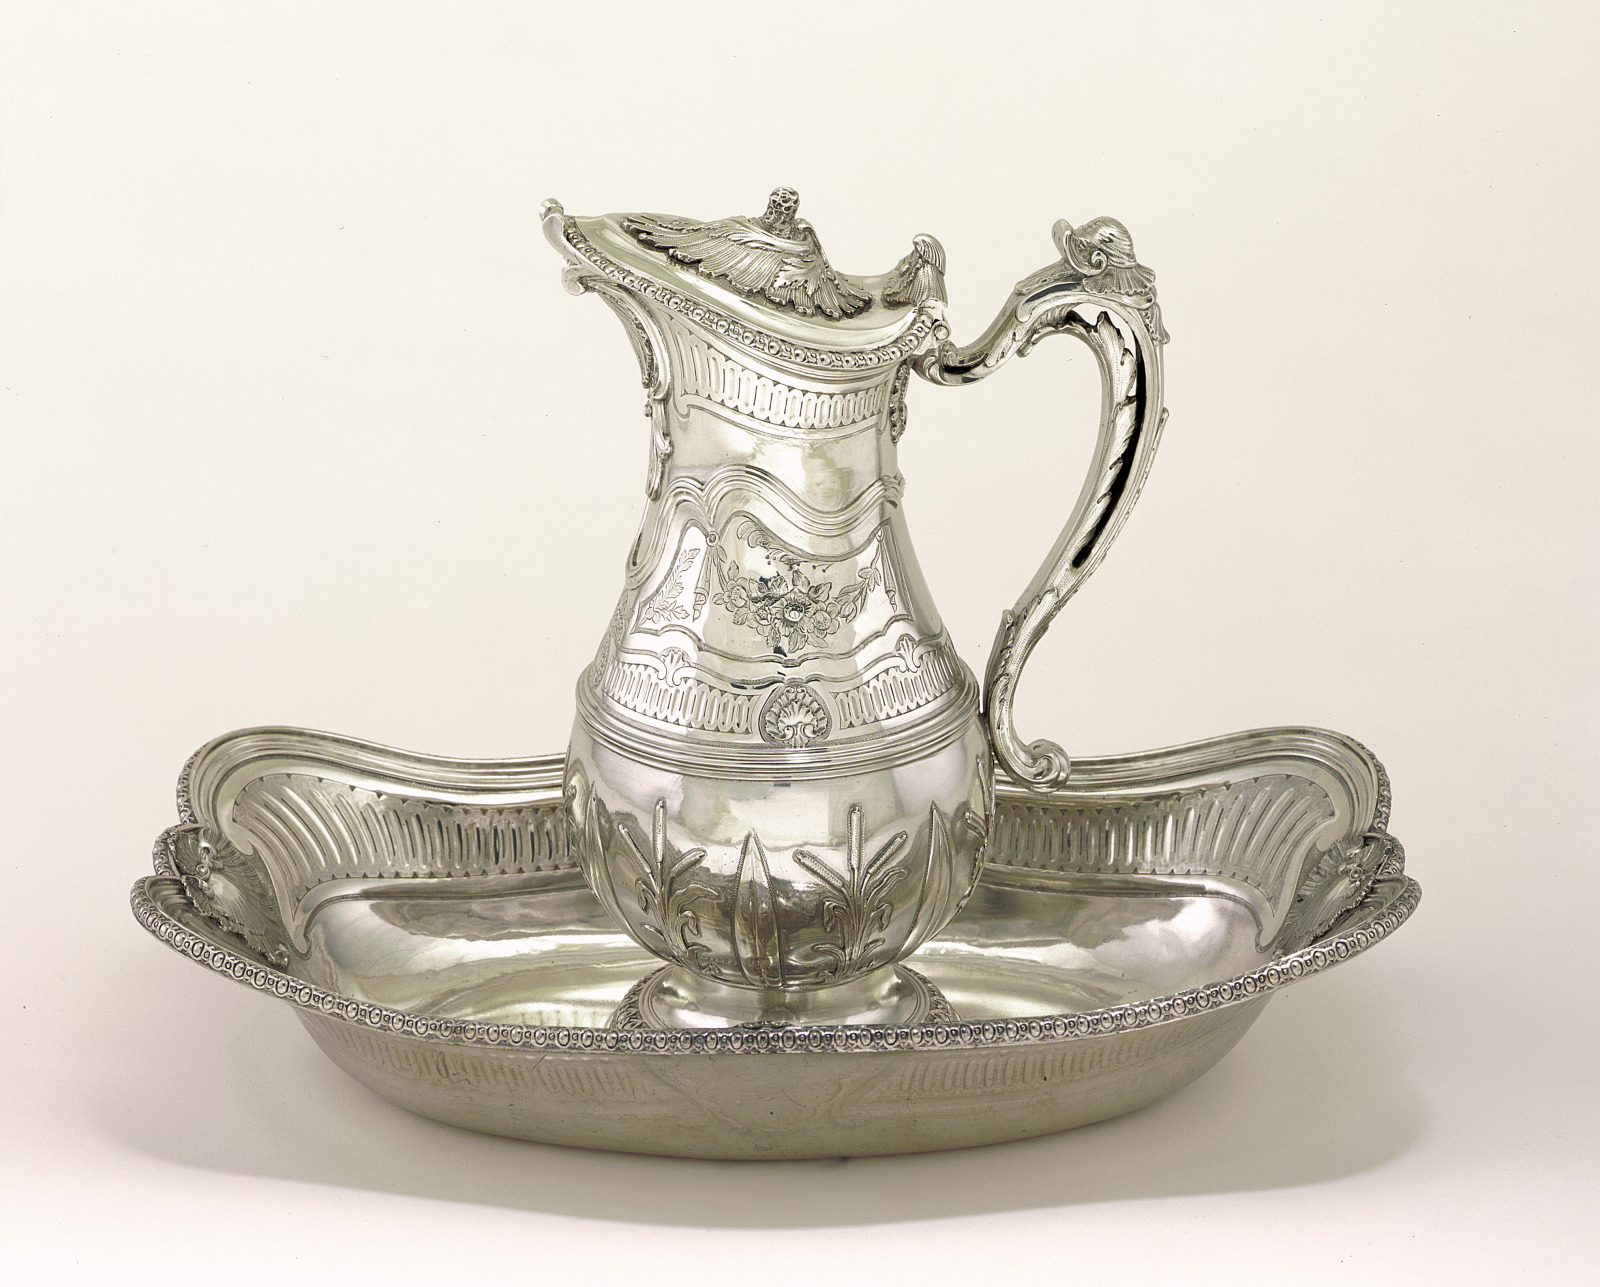 Sold at Auction: St. Louis Silver Co. Quadruple Plate & Wood Stein